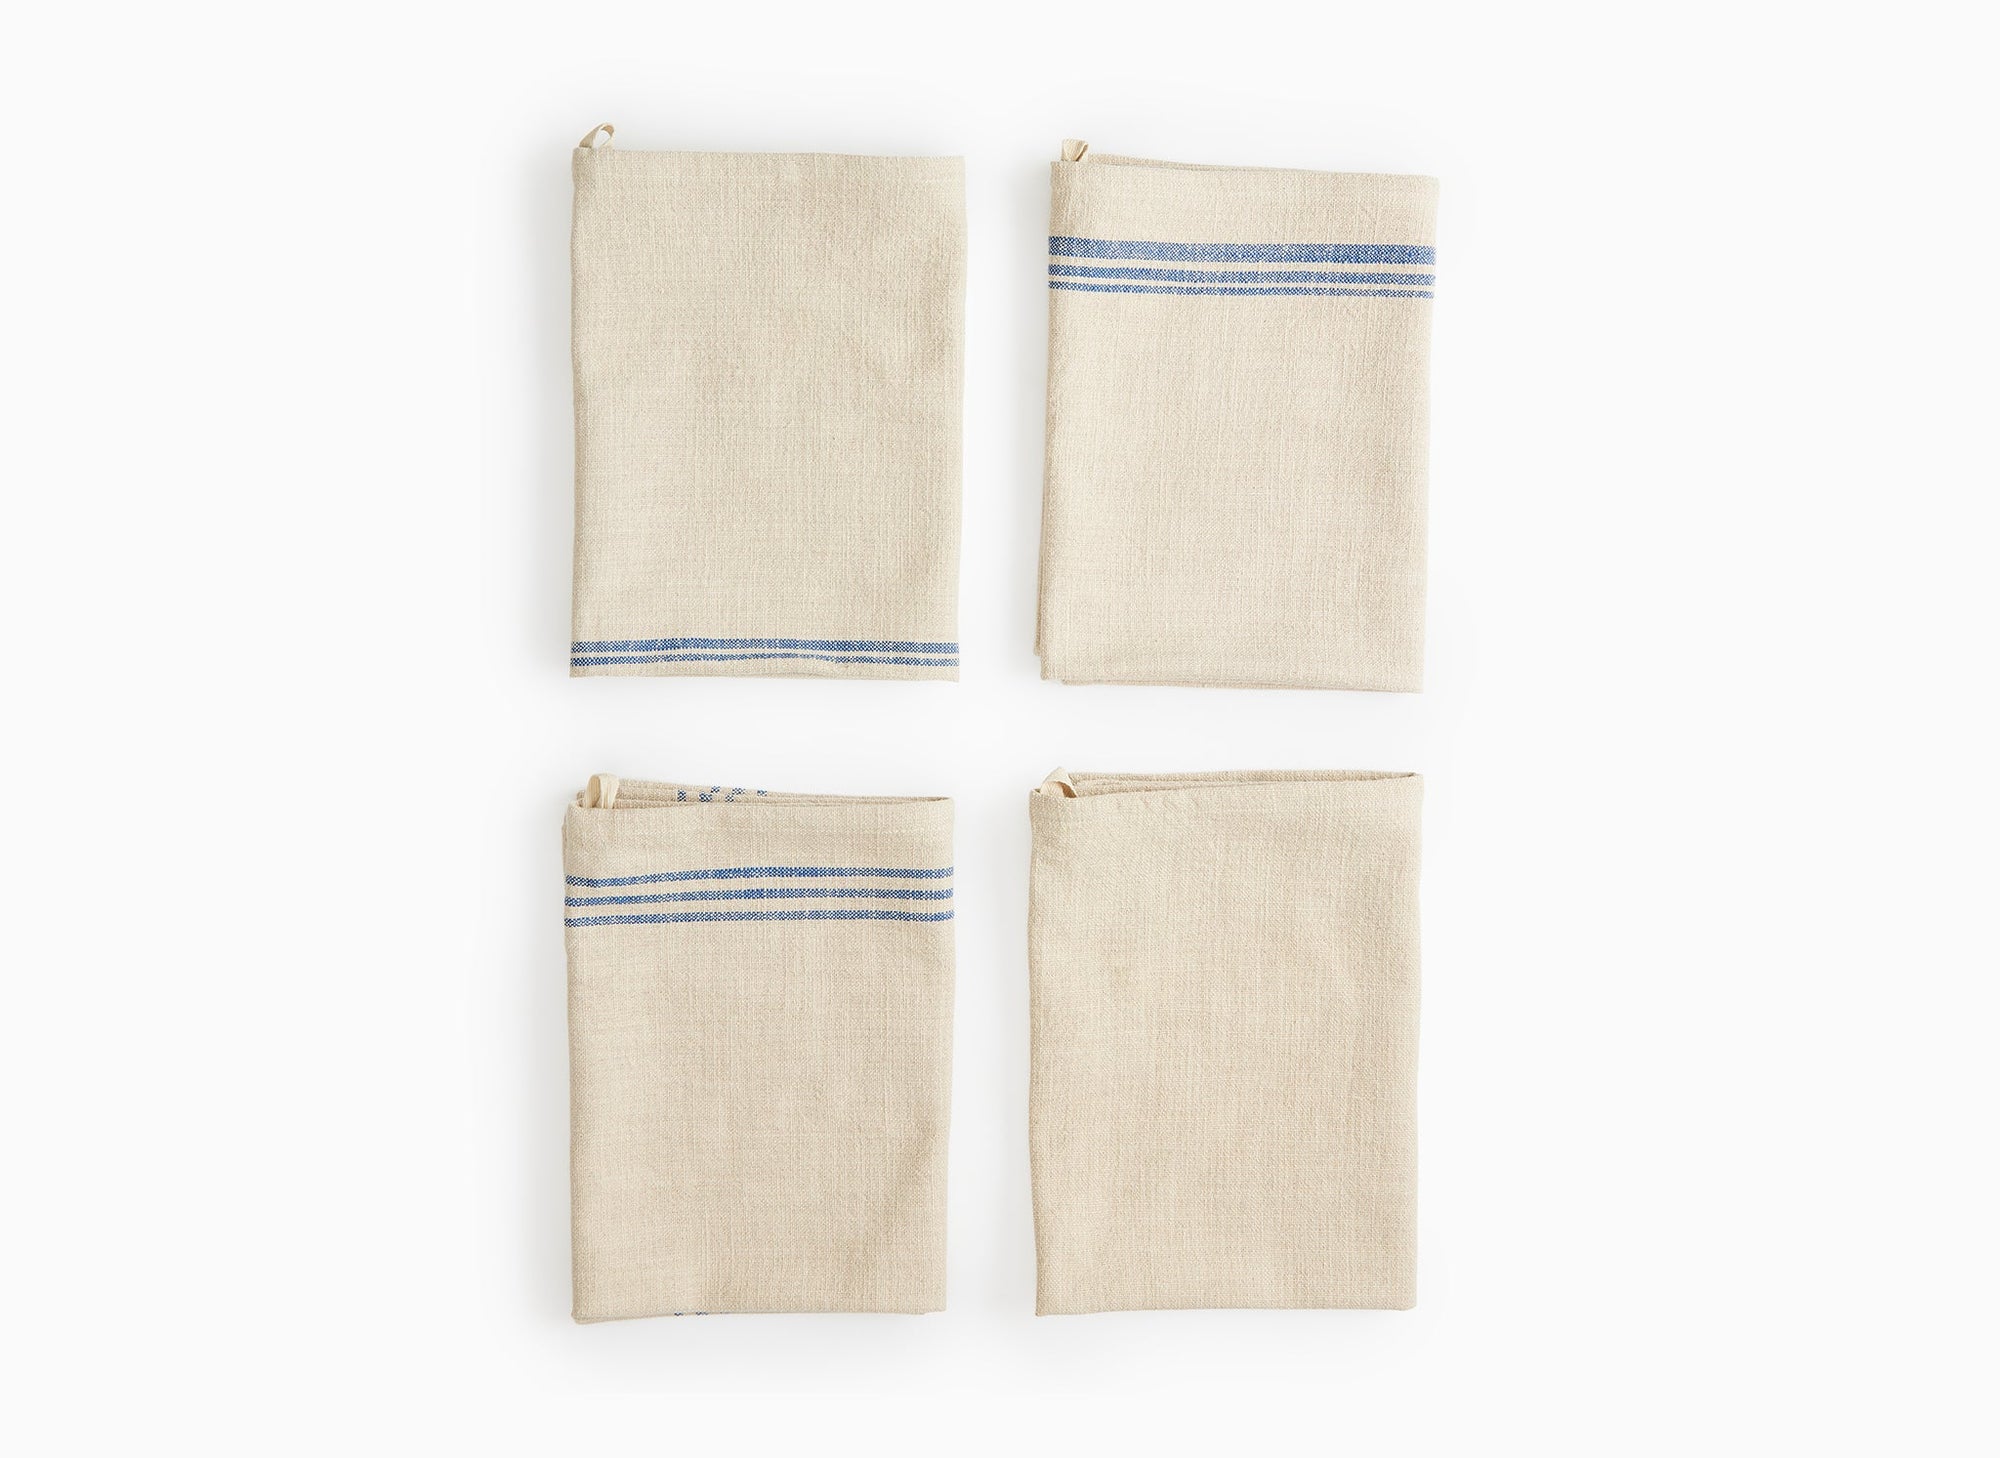 Four folded Misen Kitchen Towels lie flat on a white background, stacked two-by-two. The varying blue stripe patterns are visible on the towels.